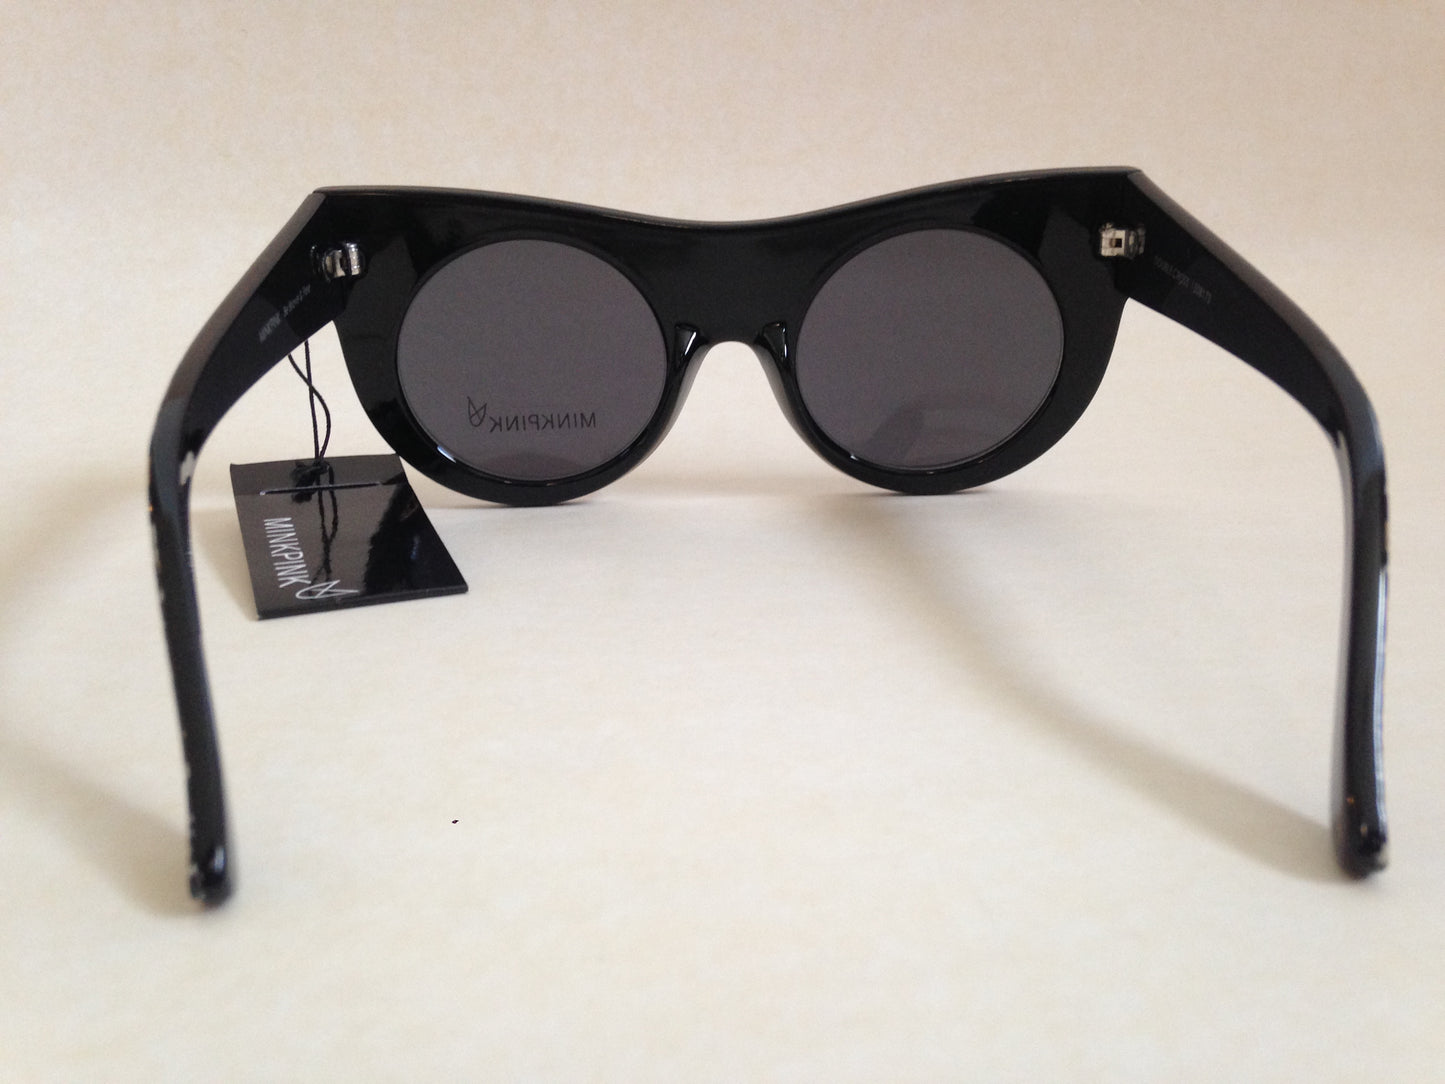 Minkpink Sunglasses New Authentic Double Cross Round Cat Eye Black With Leopard - Sunglasses